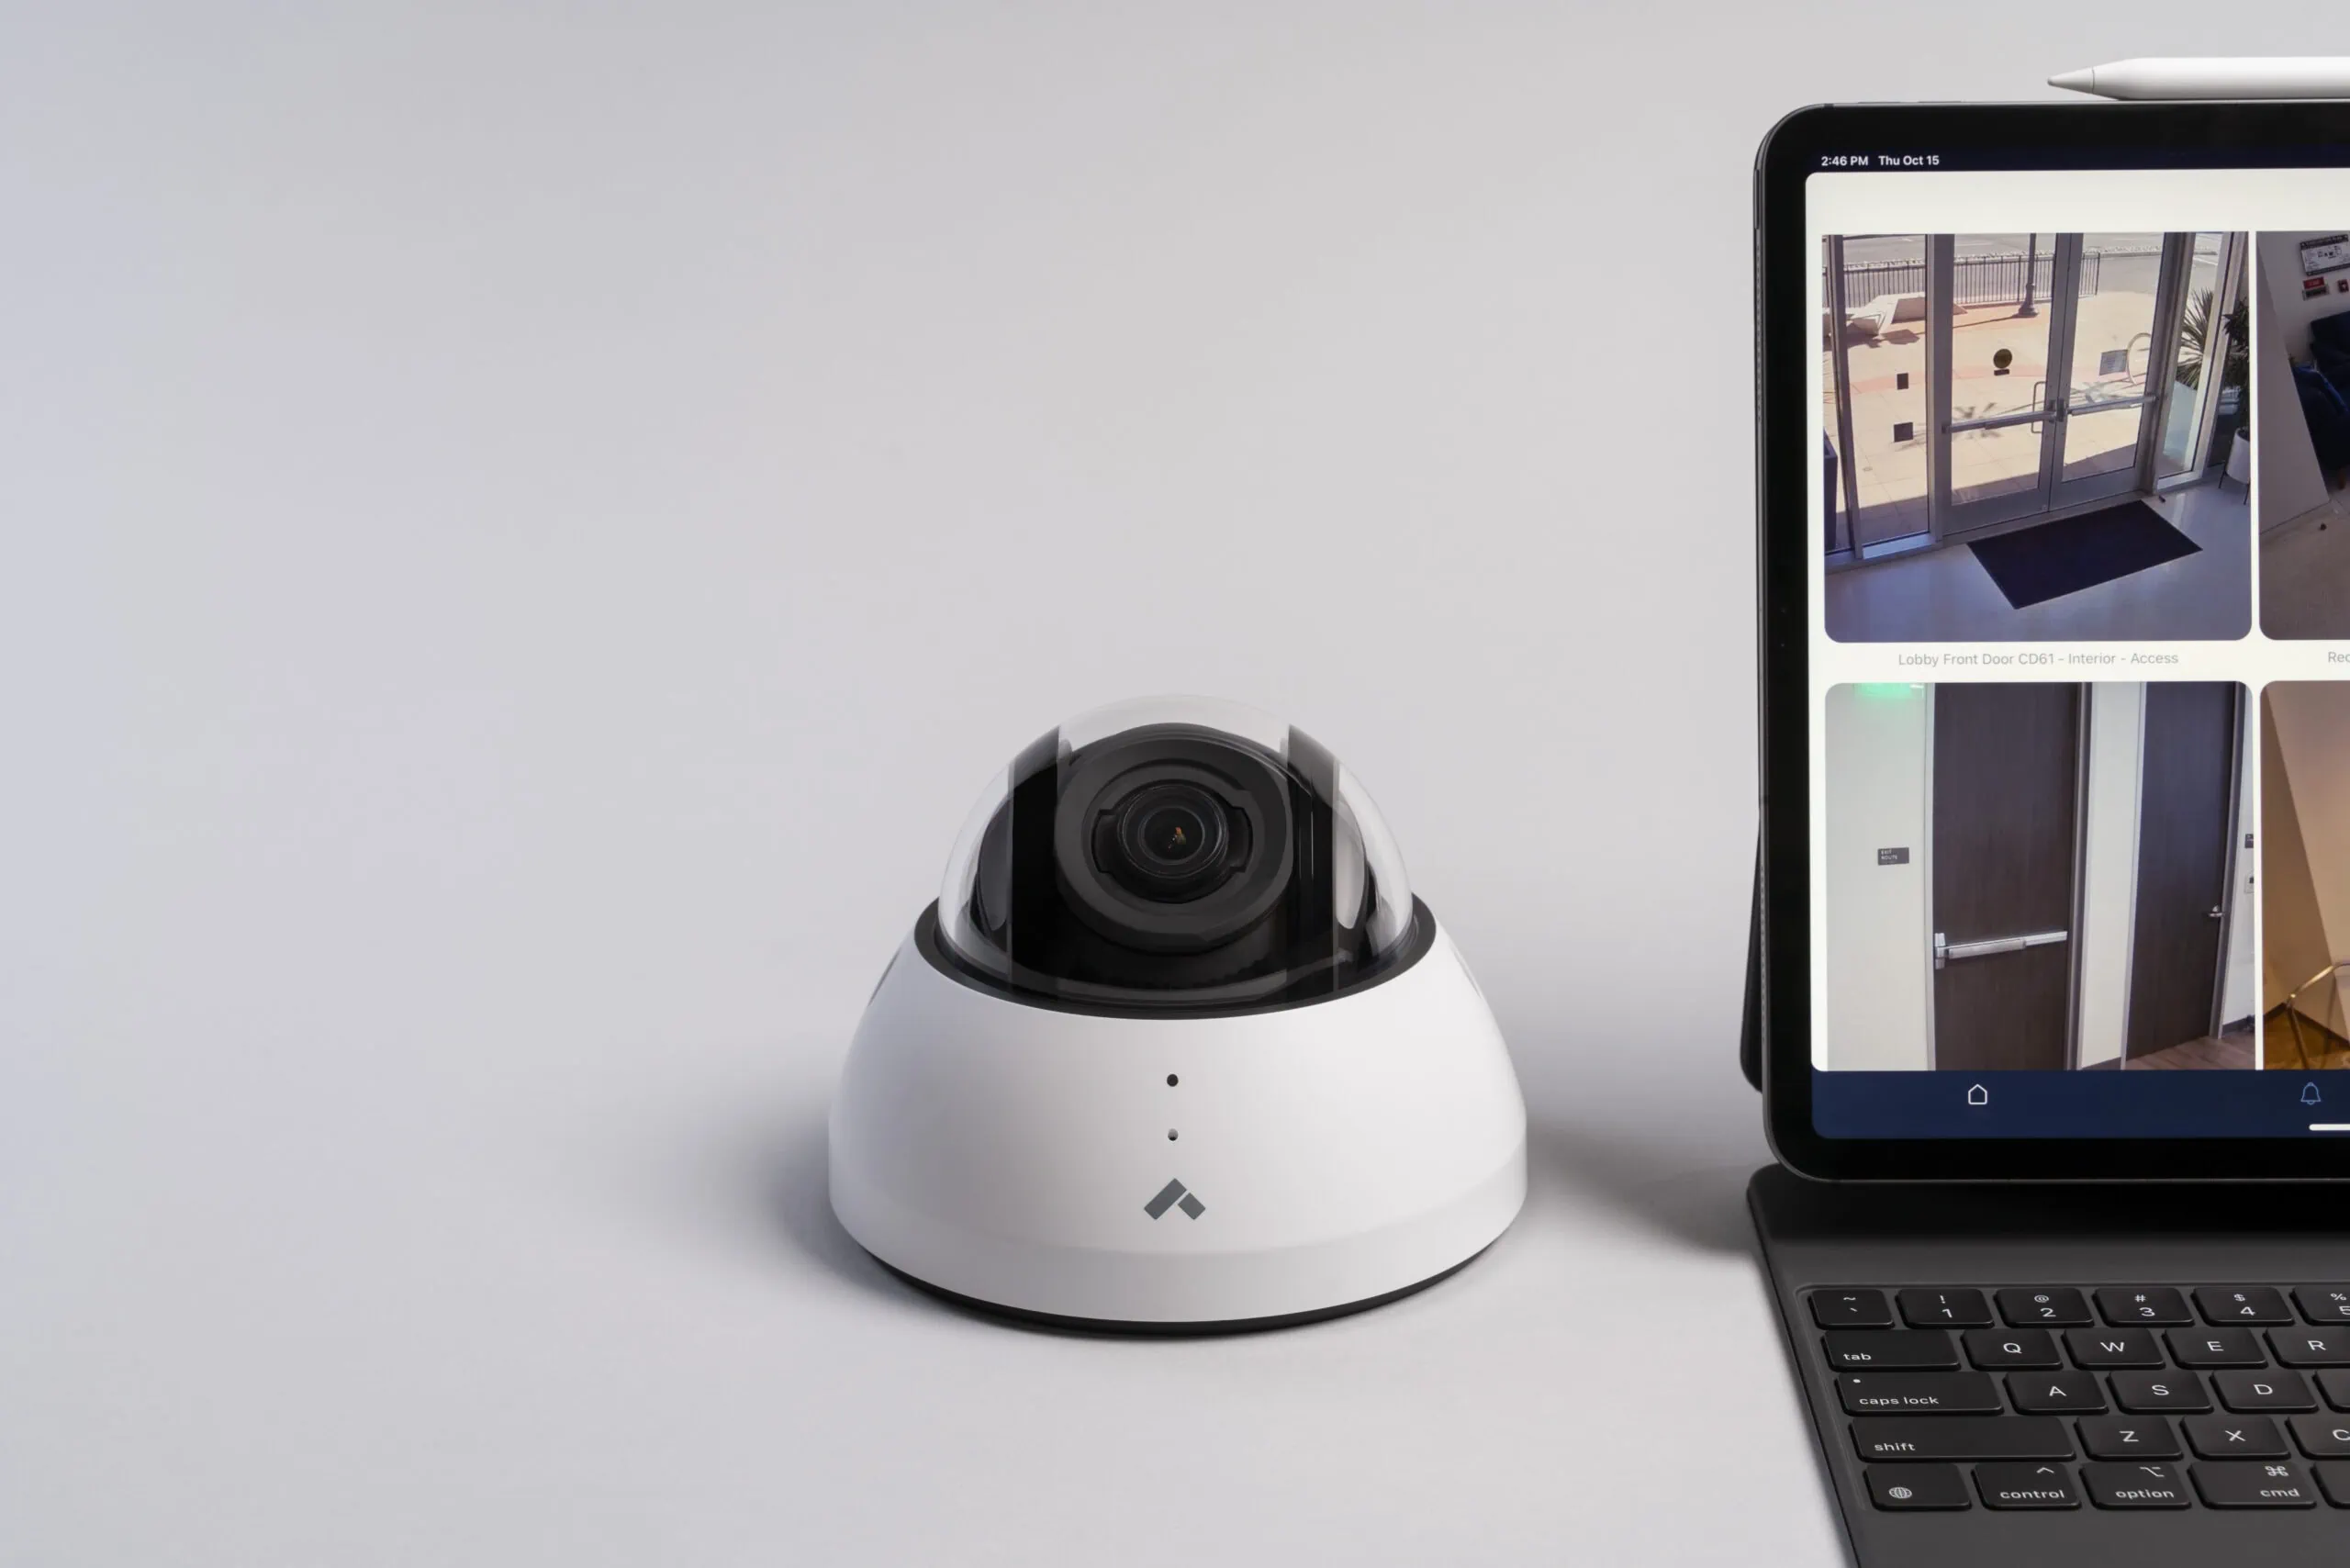 Dome camera for security monitoring